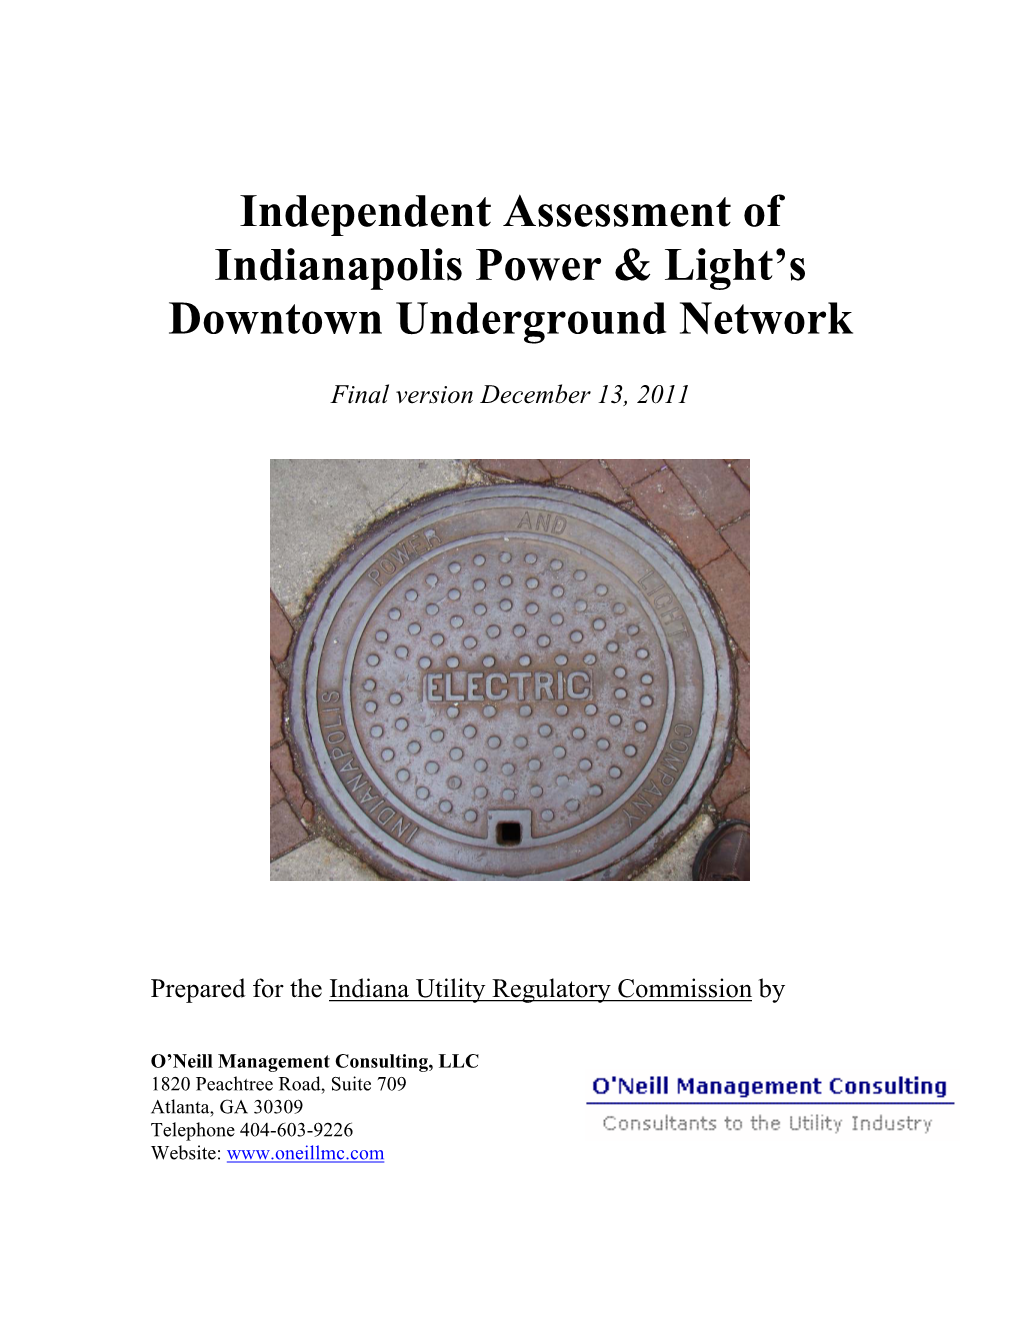 Independent Assessment of Indianapolis Power & Light's